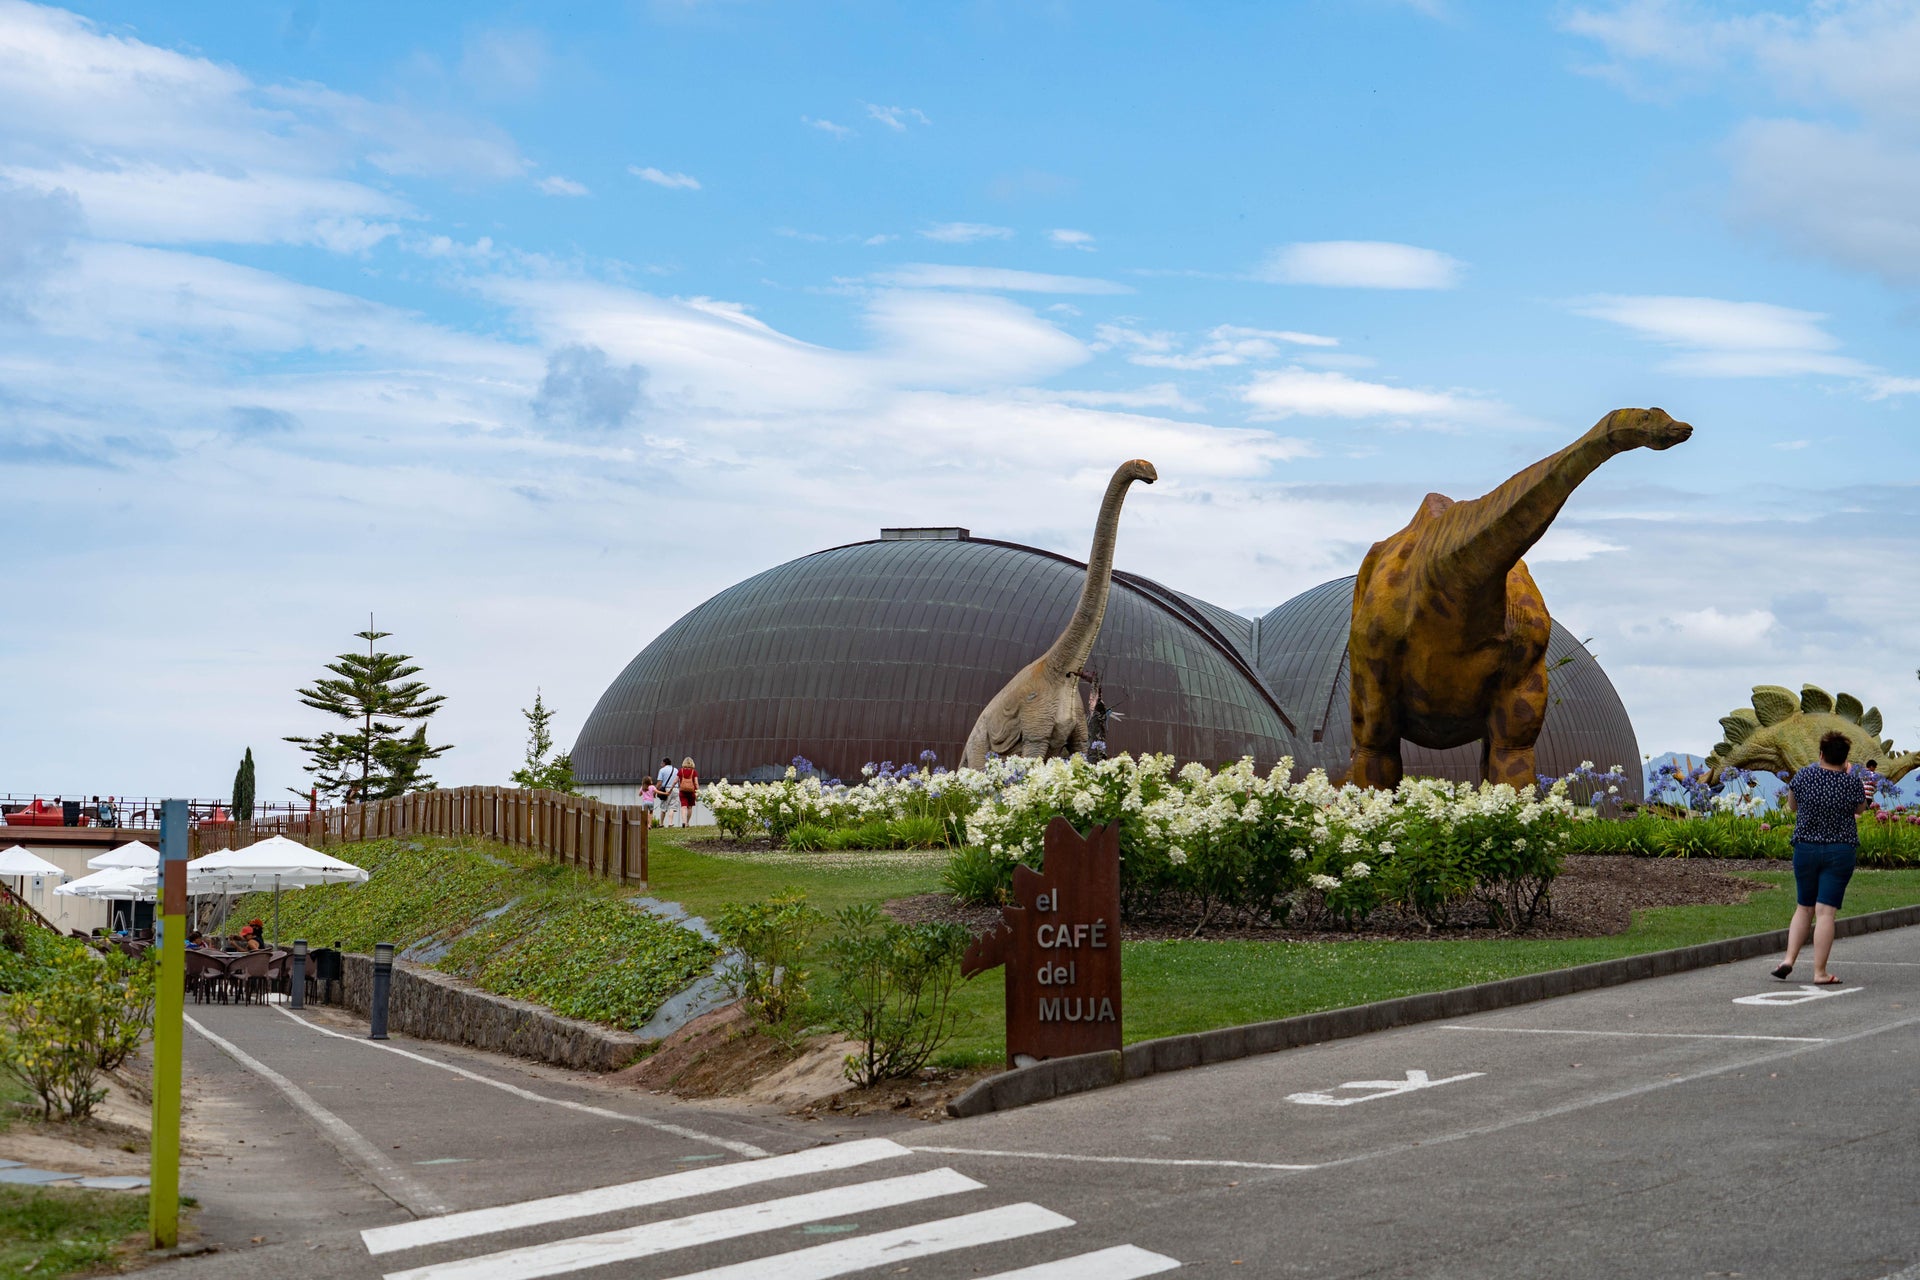 Ticket for the Jurassic Museum of Asturias